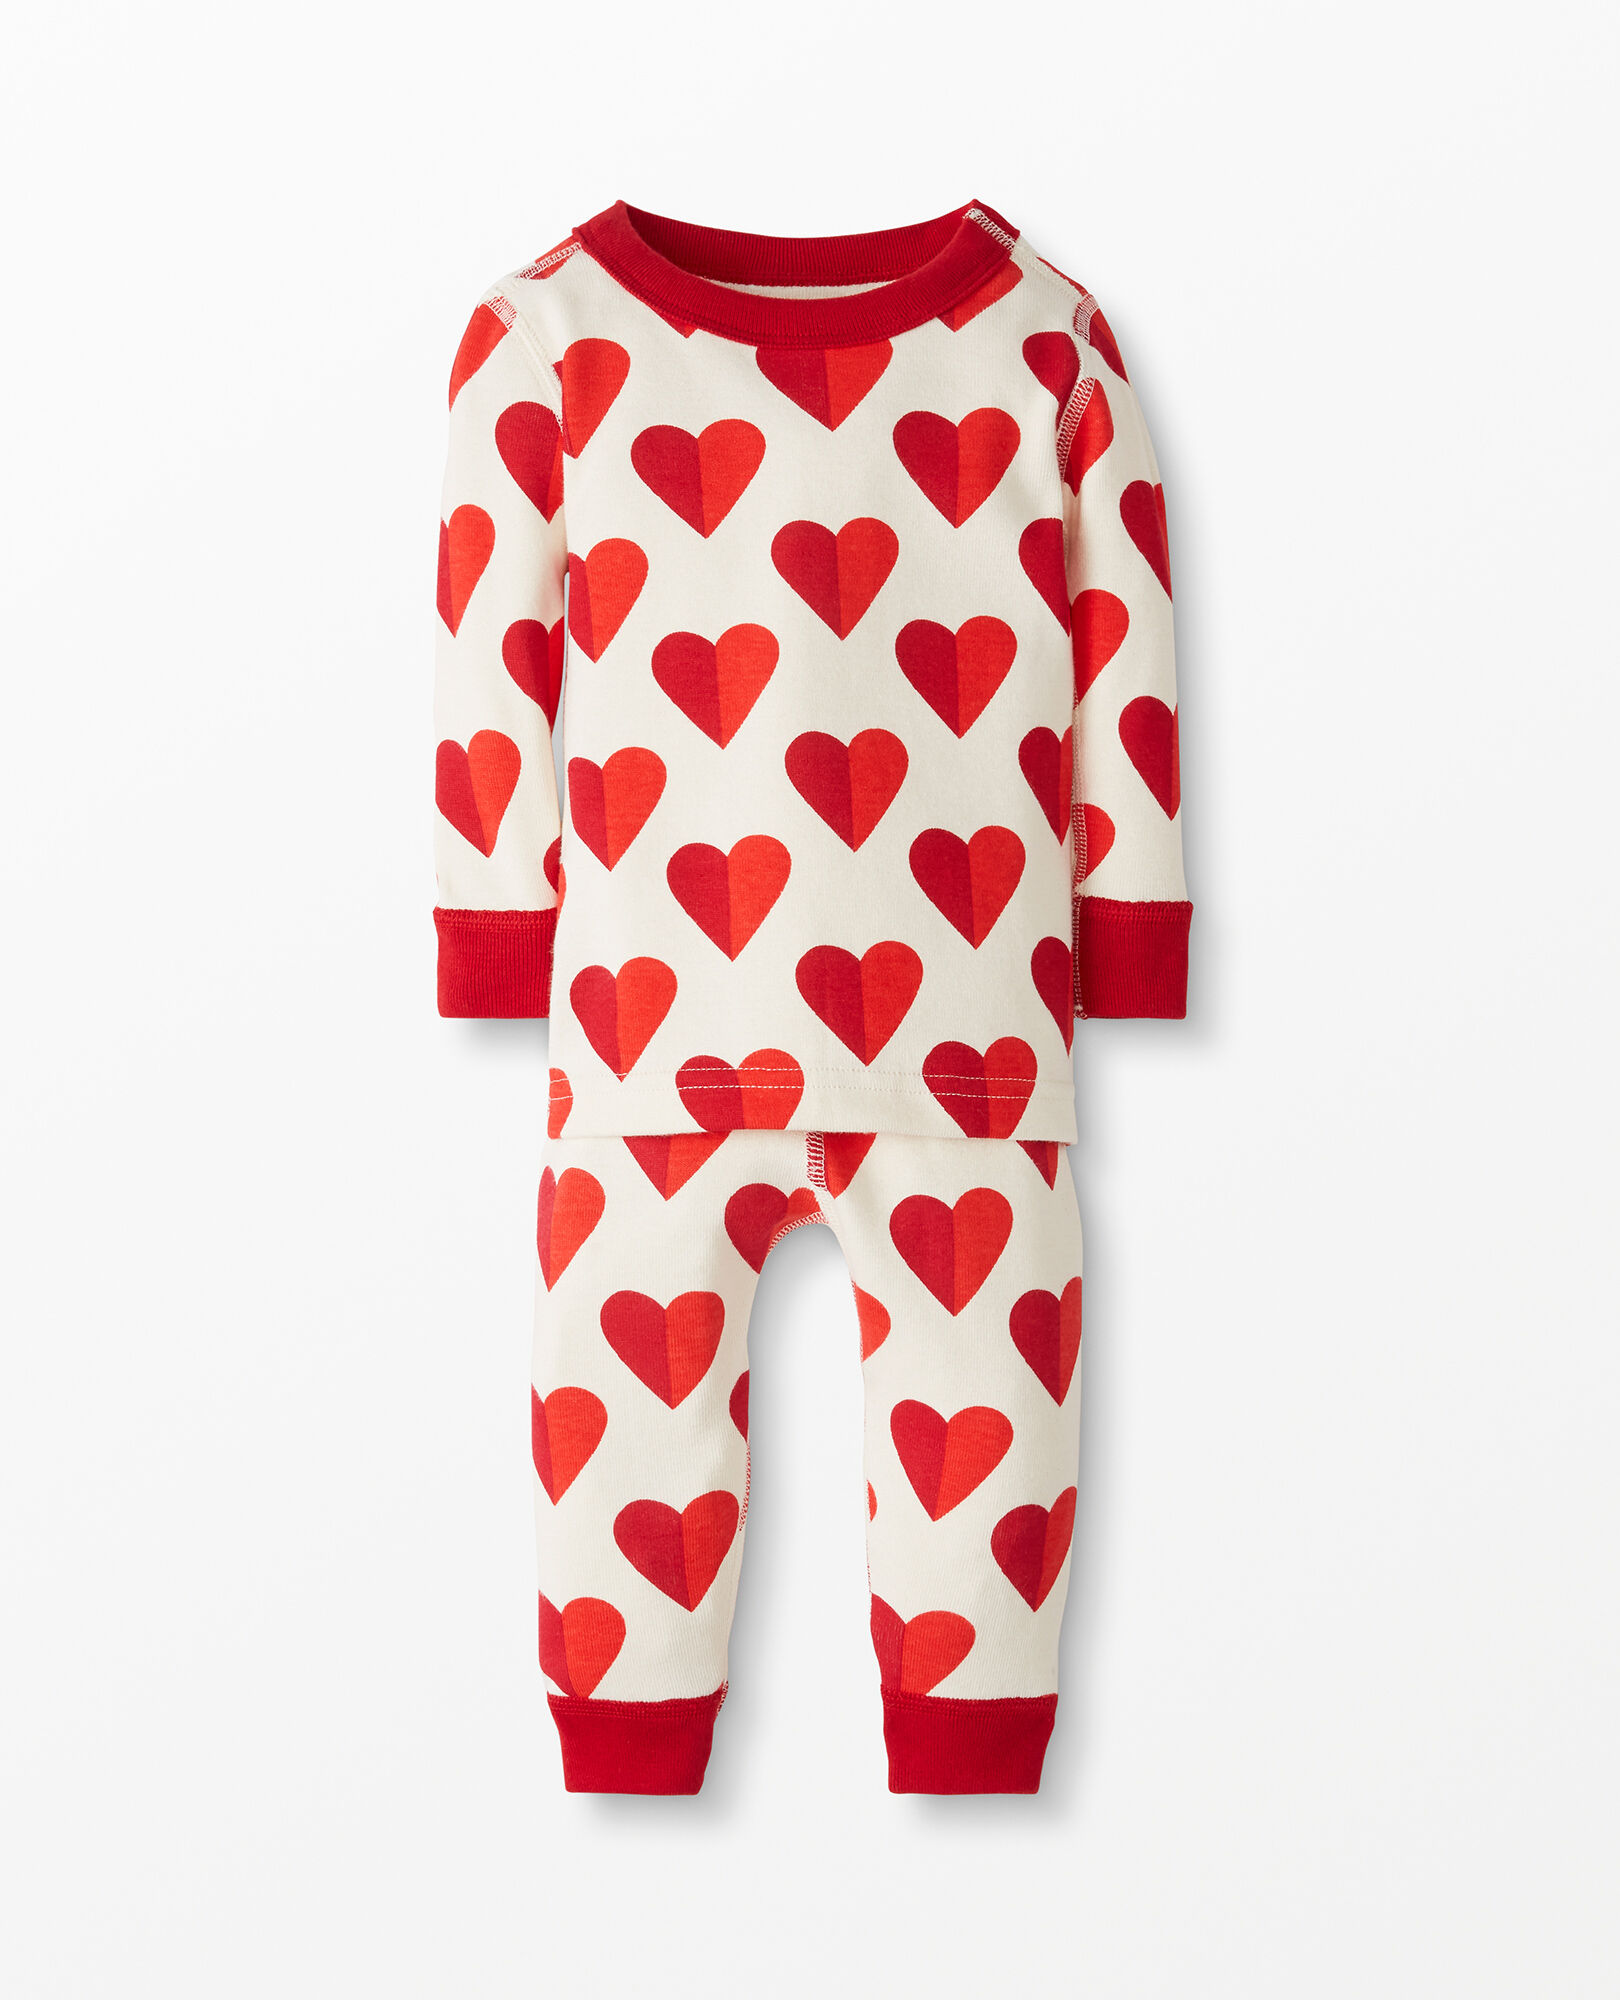 Hanna Andersson gumdrop gummy candy long johns pajamas 100 110 120 130 4 5 6 NW